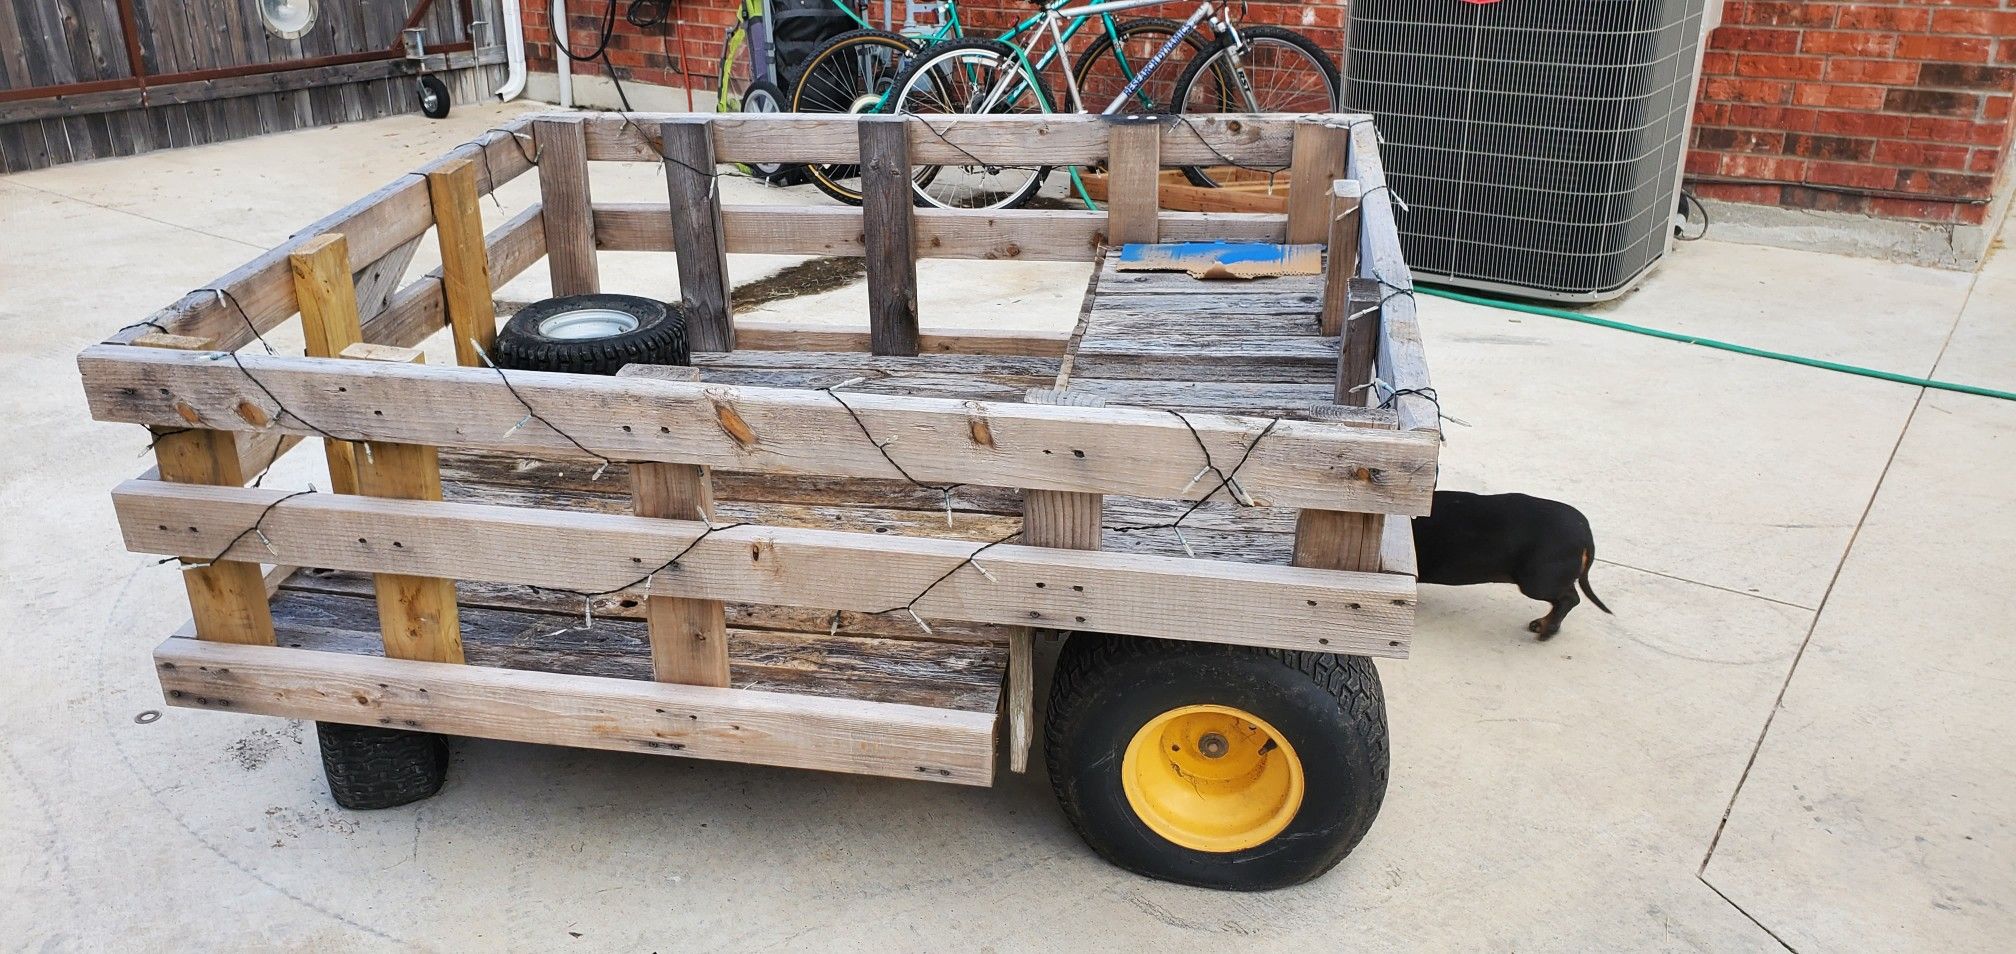 Utility trailer for riding lawn mower